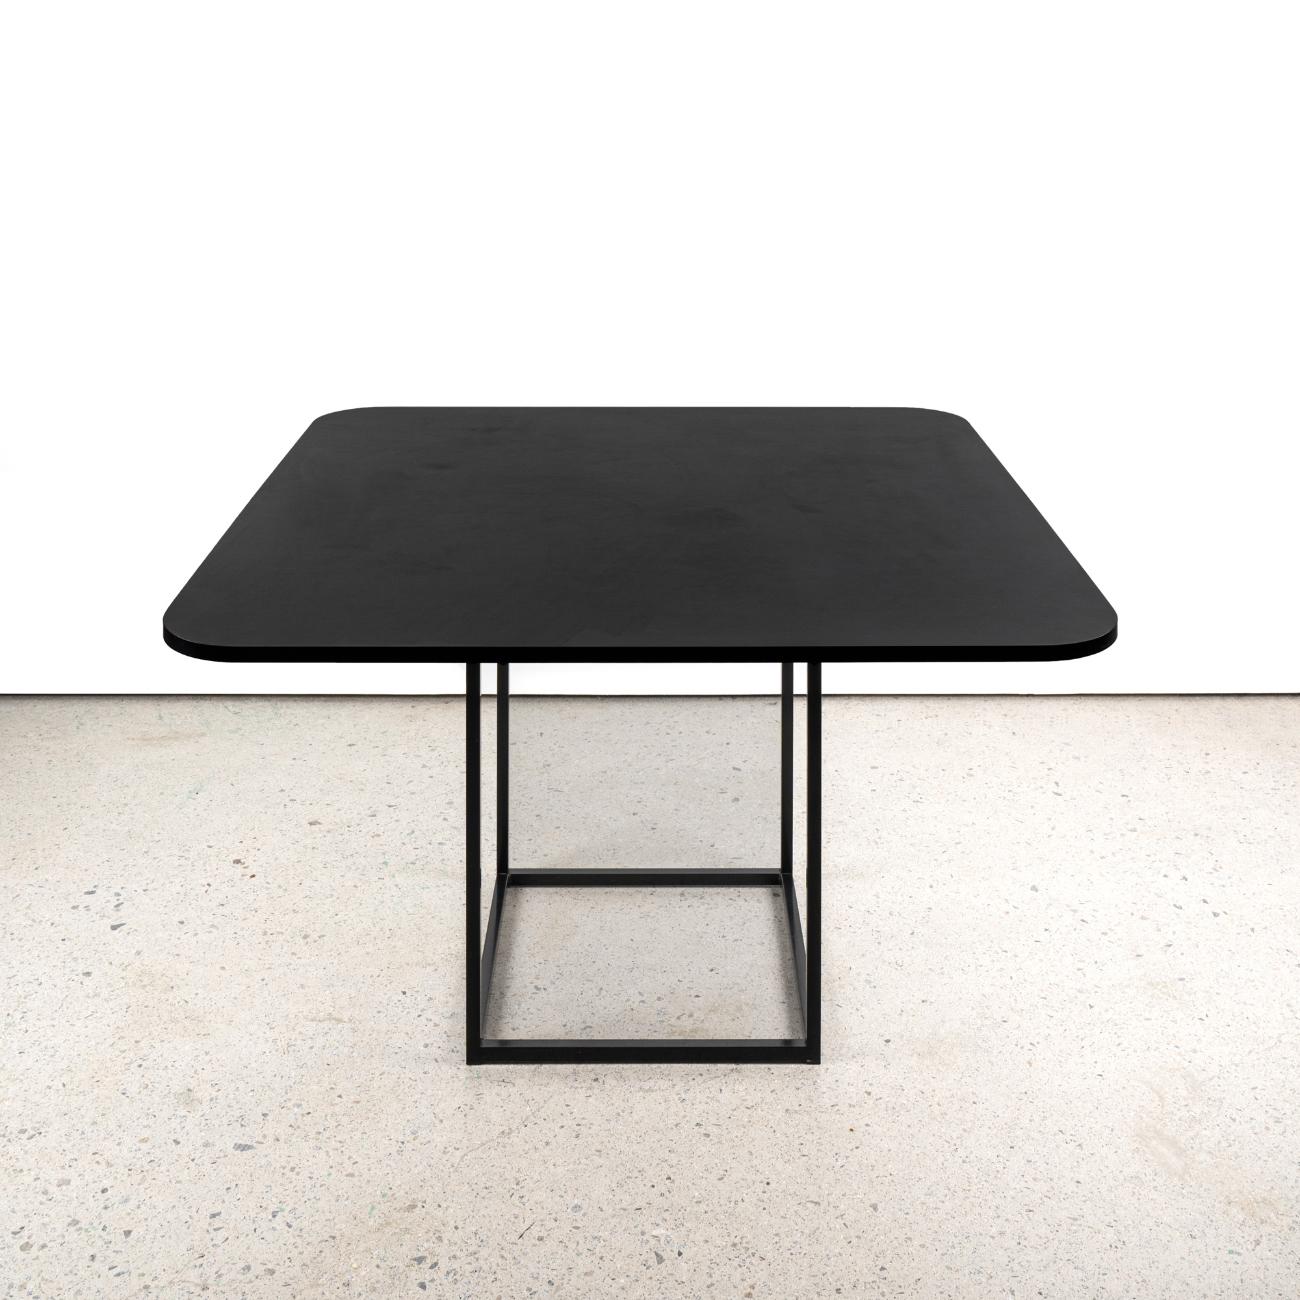 Late 20th Century TM40 Dining Table by Pierre Mazairac & Karel Boonzaaijer For Sale